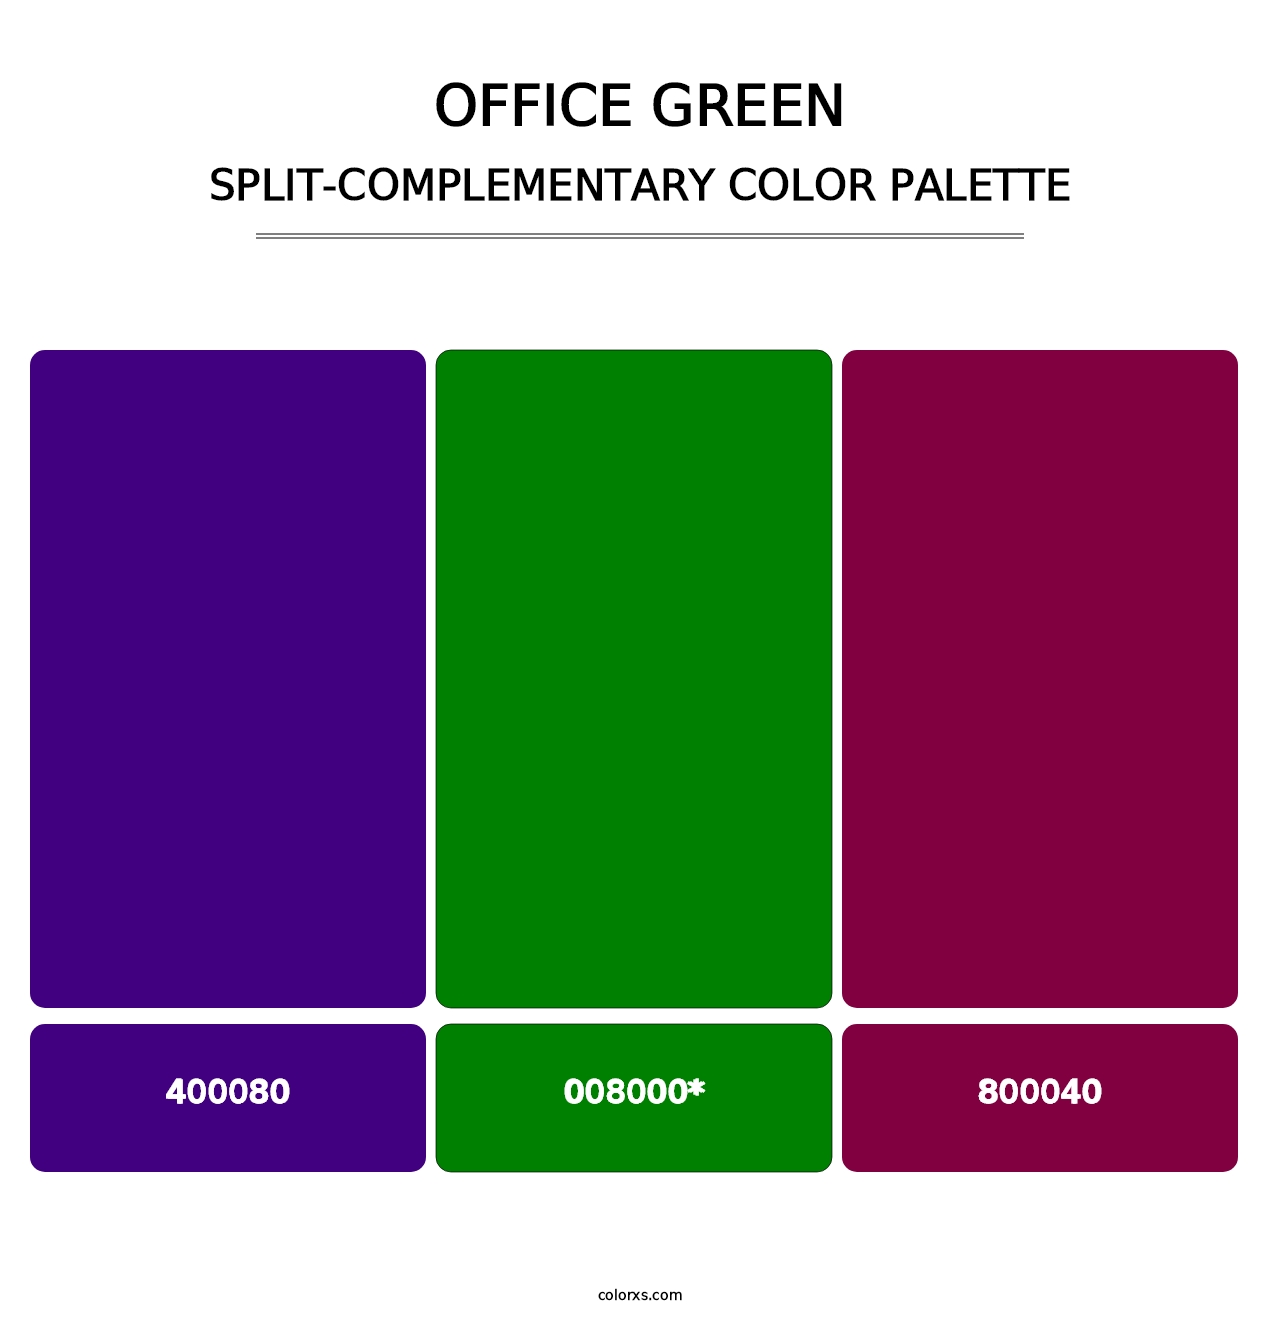 Office Green - Split-Complementary Color Palette